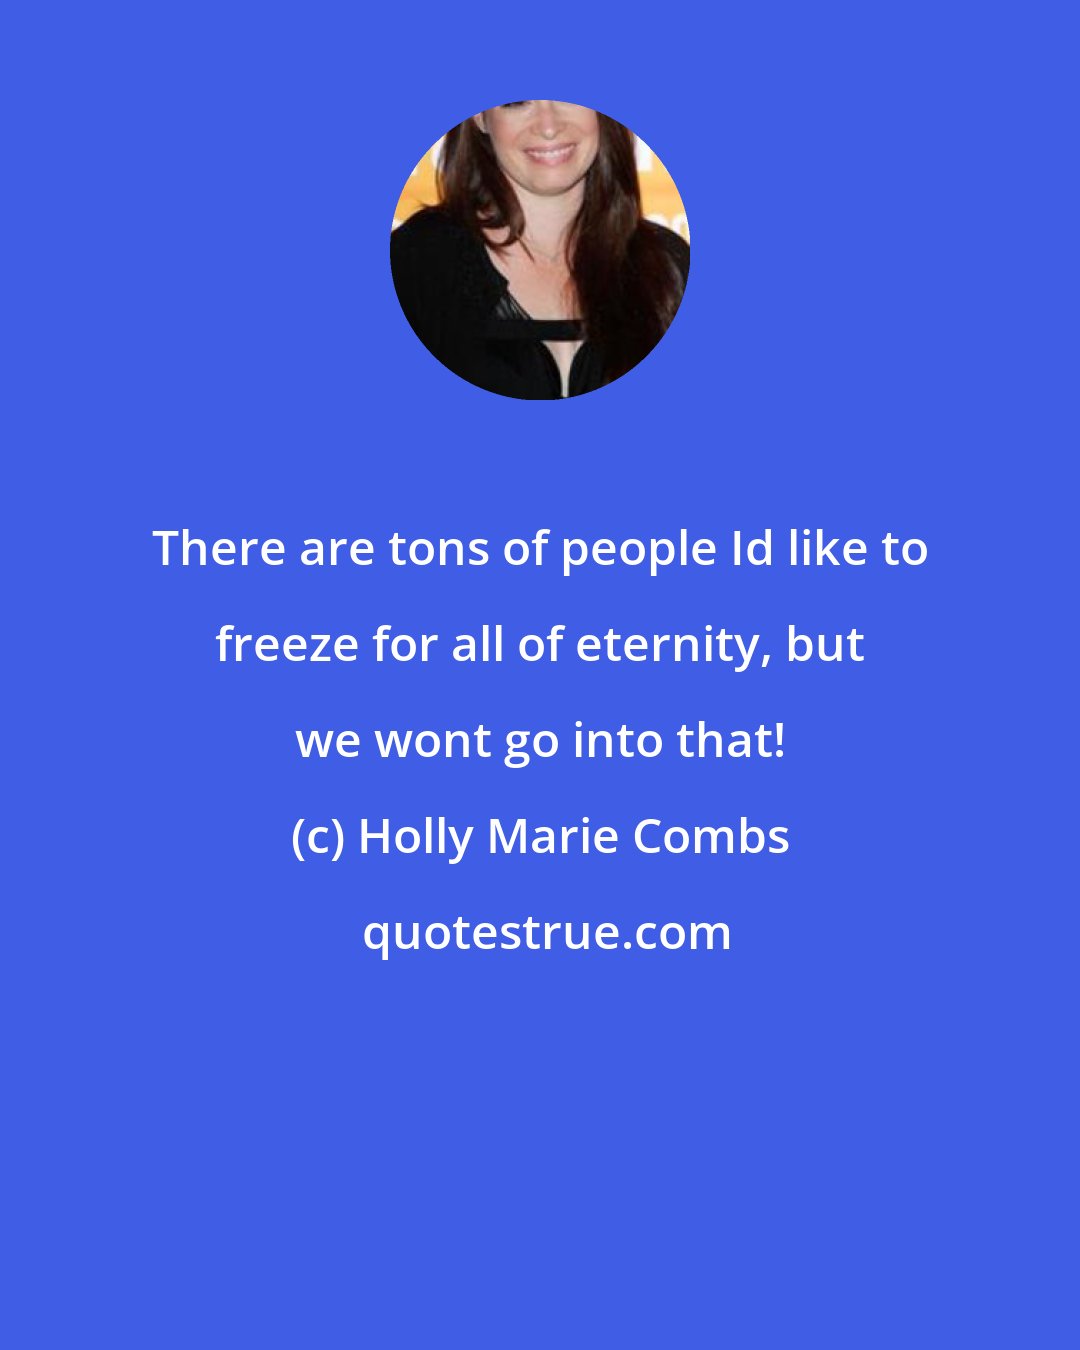 Holly Marie Combs: There are tons of people Id like to freeze for all of eternity, but we wont go into that!